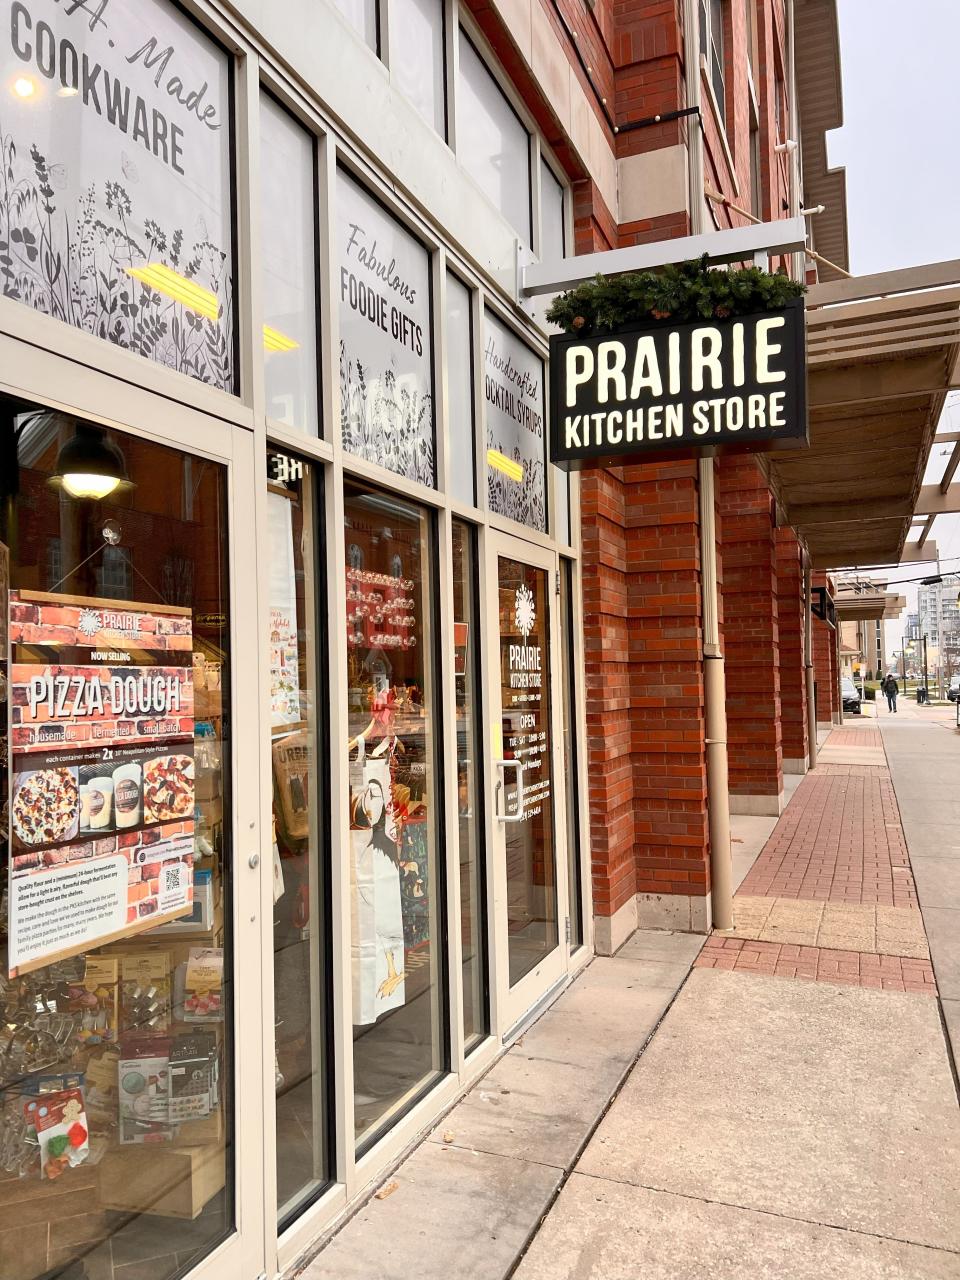 Prairie Kitchen Store is a kitchen supply store on the northside. Open from 10 a.m. to 5 p.m. Tuesday through Saturday, and 10 a.m to 4 p.m. on Sunday.